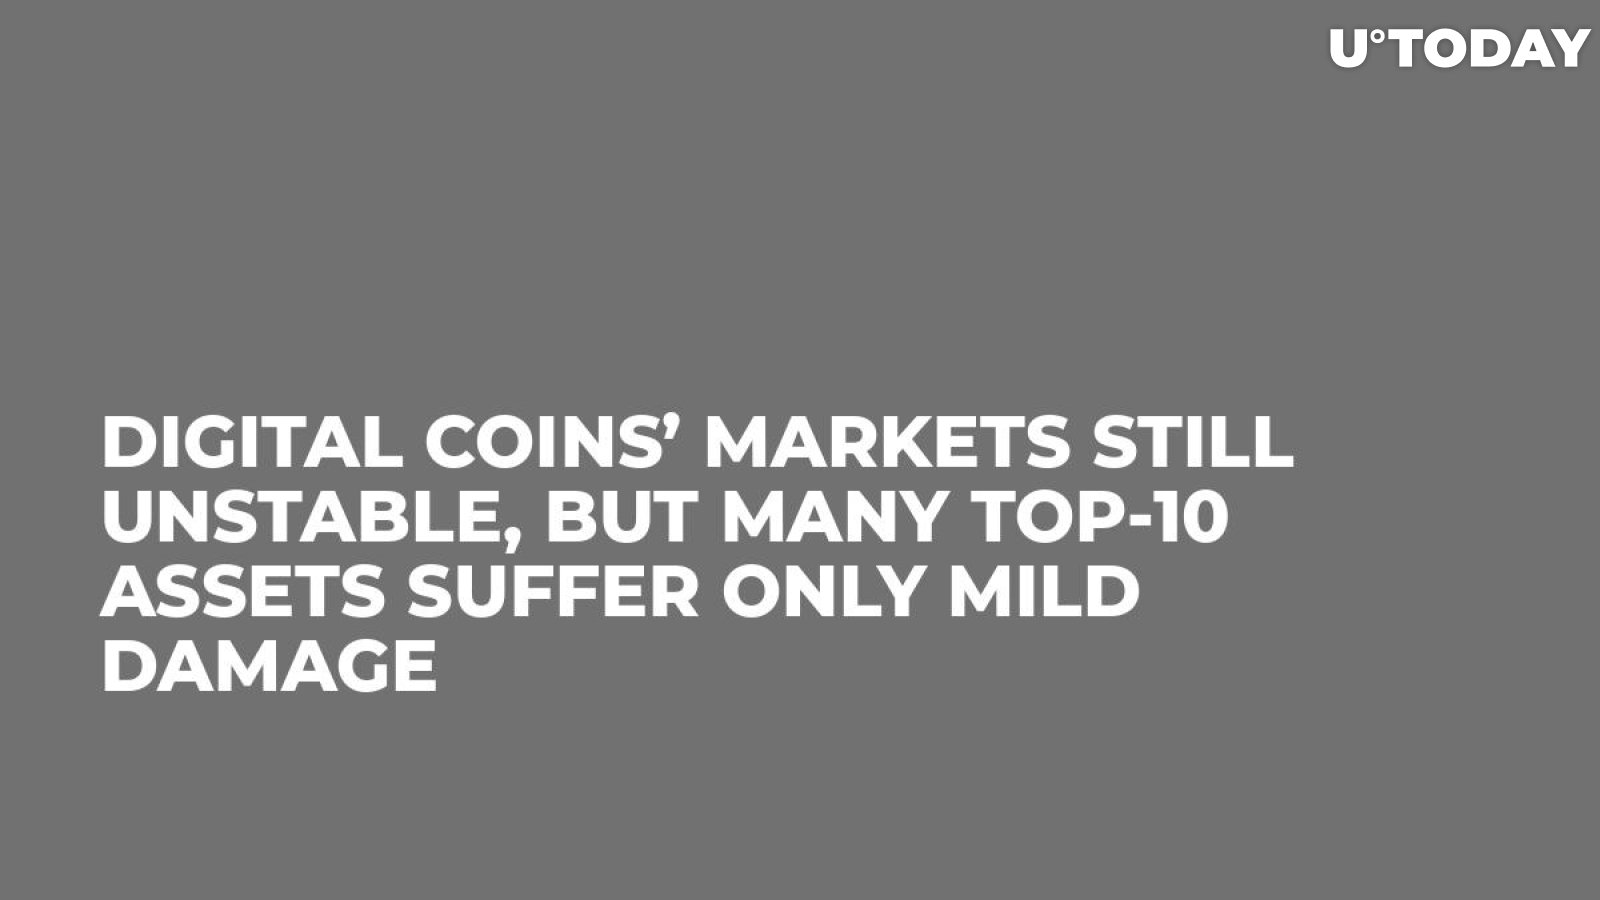 Digital Coins’ Markets Still Unstable, But Many Top-10 Assets Suffer Only Mild Damage